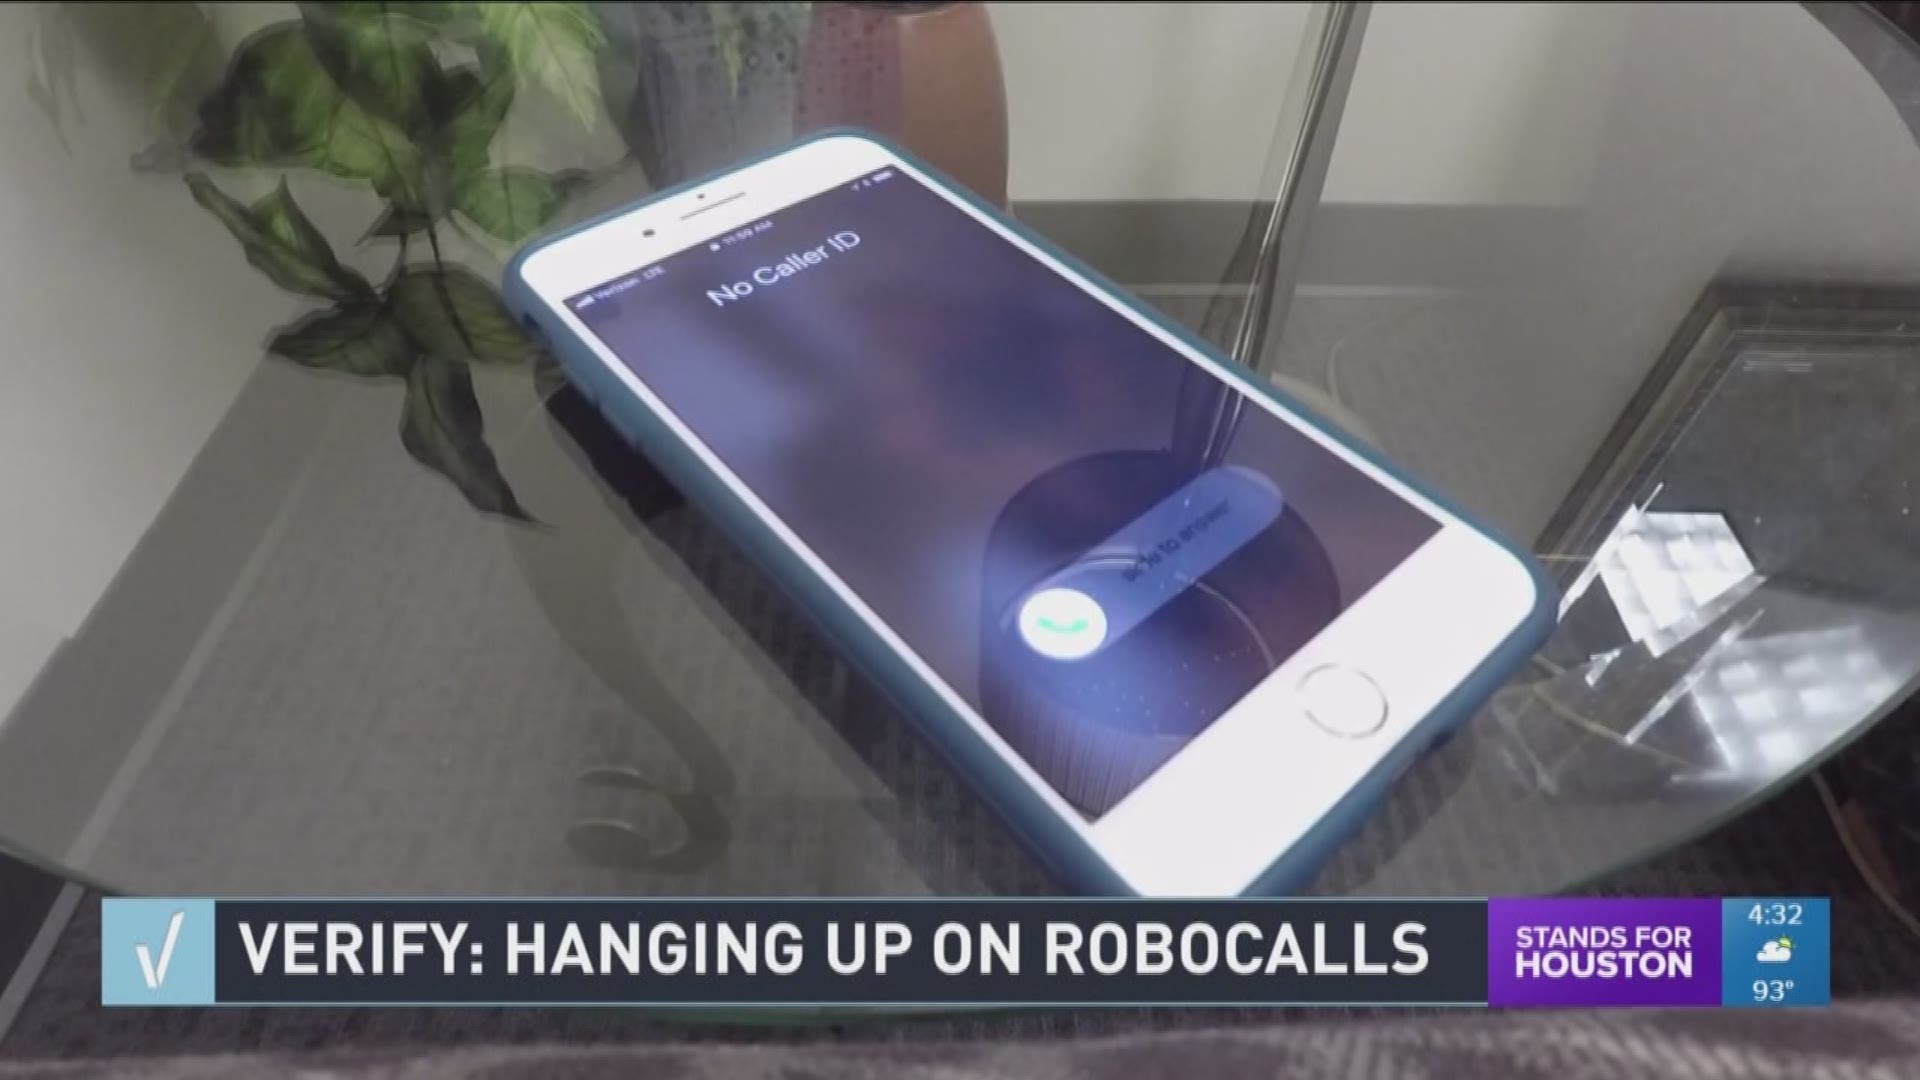 We're answering a viewer question by looking into dreaded robocalls and how to stop them.